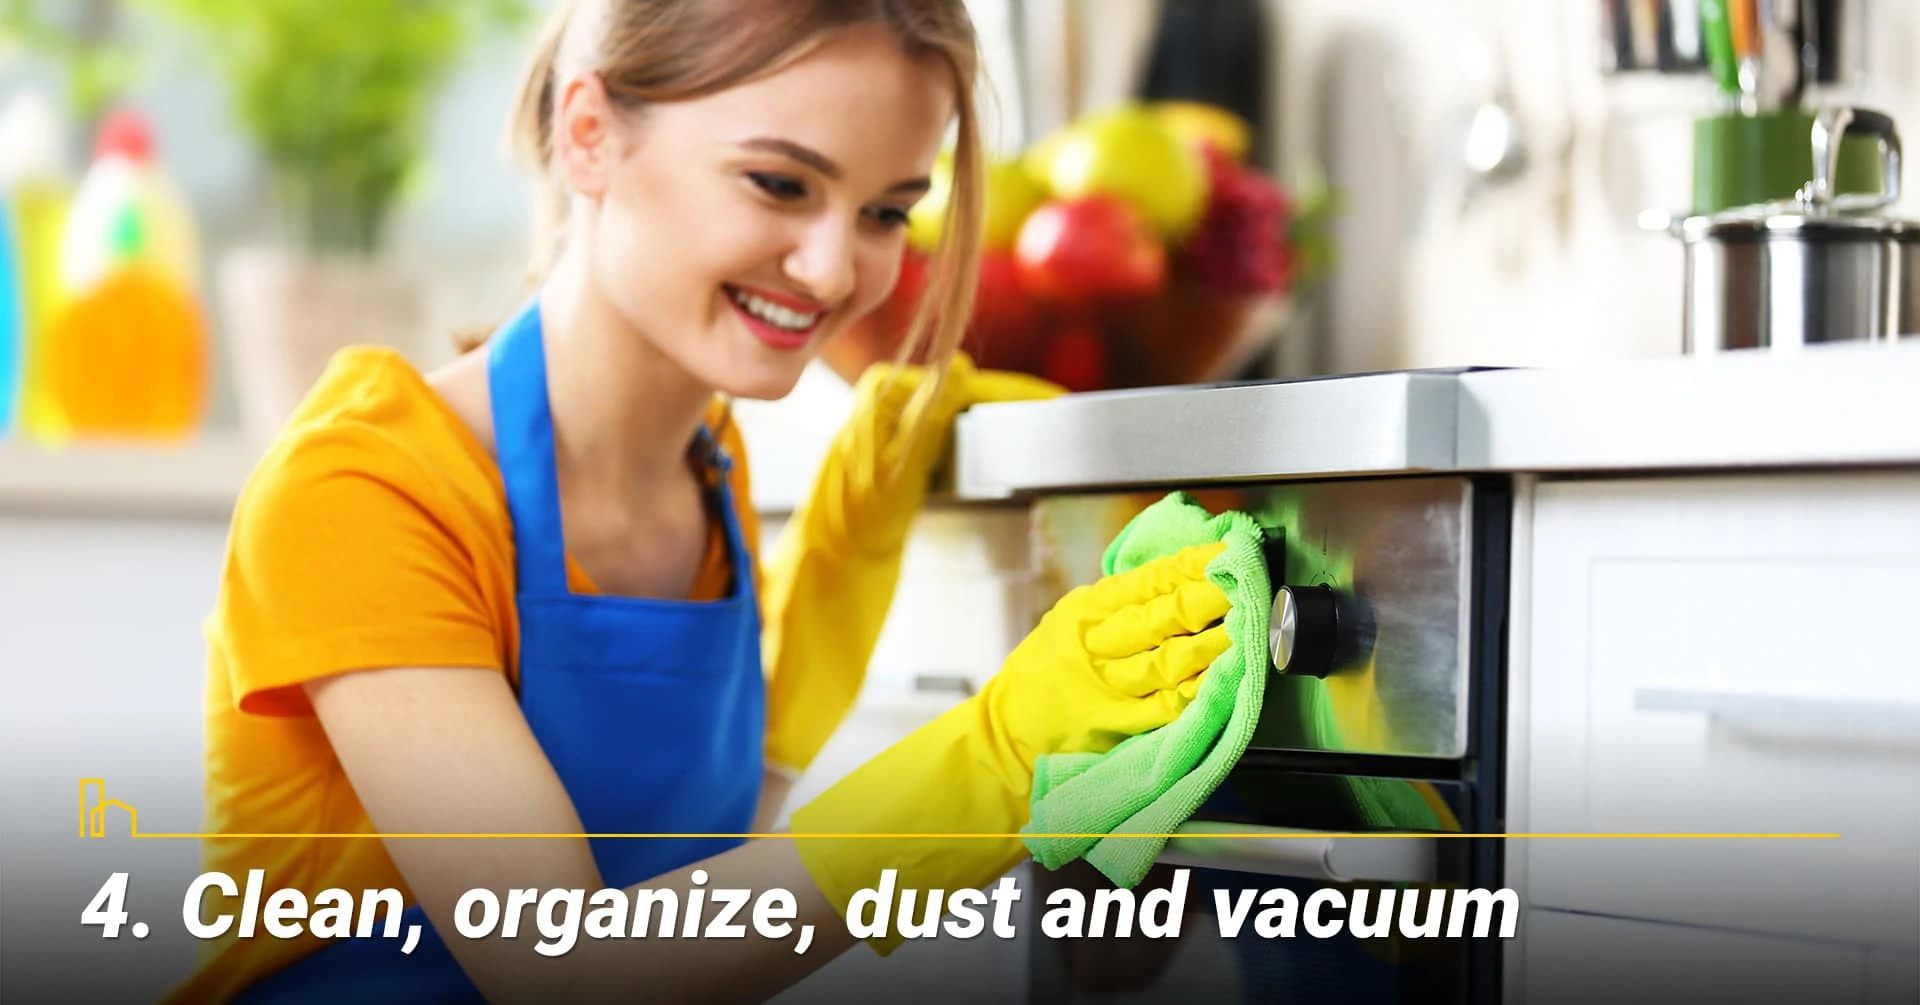 Clean, organize, dust and vacuum, keep your home clean